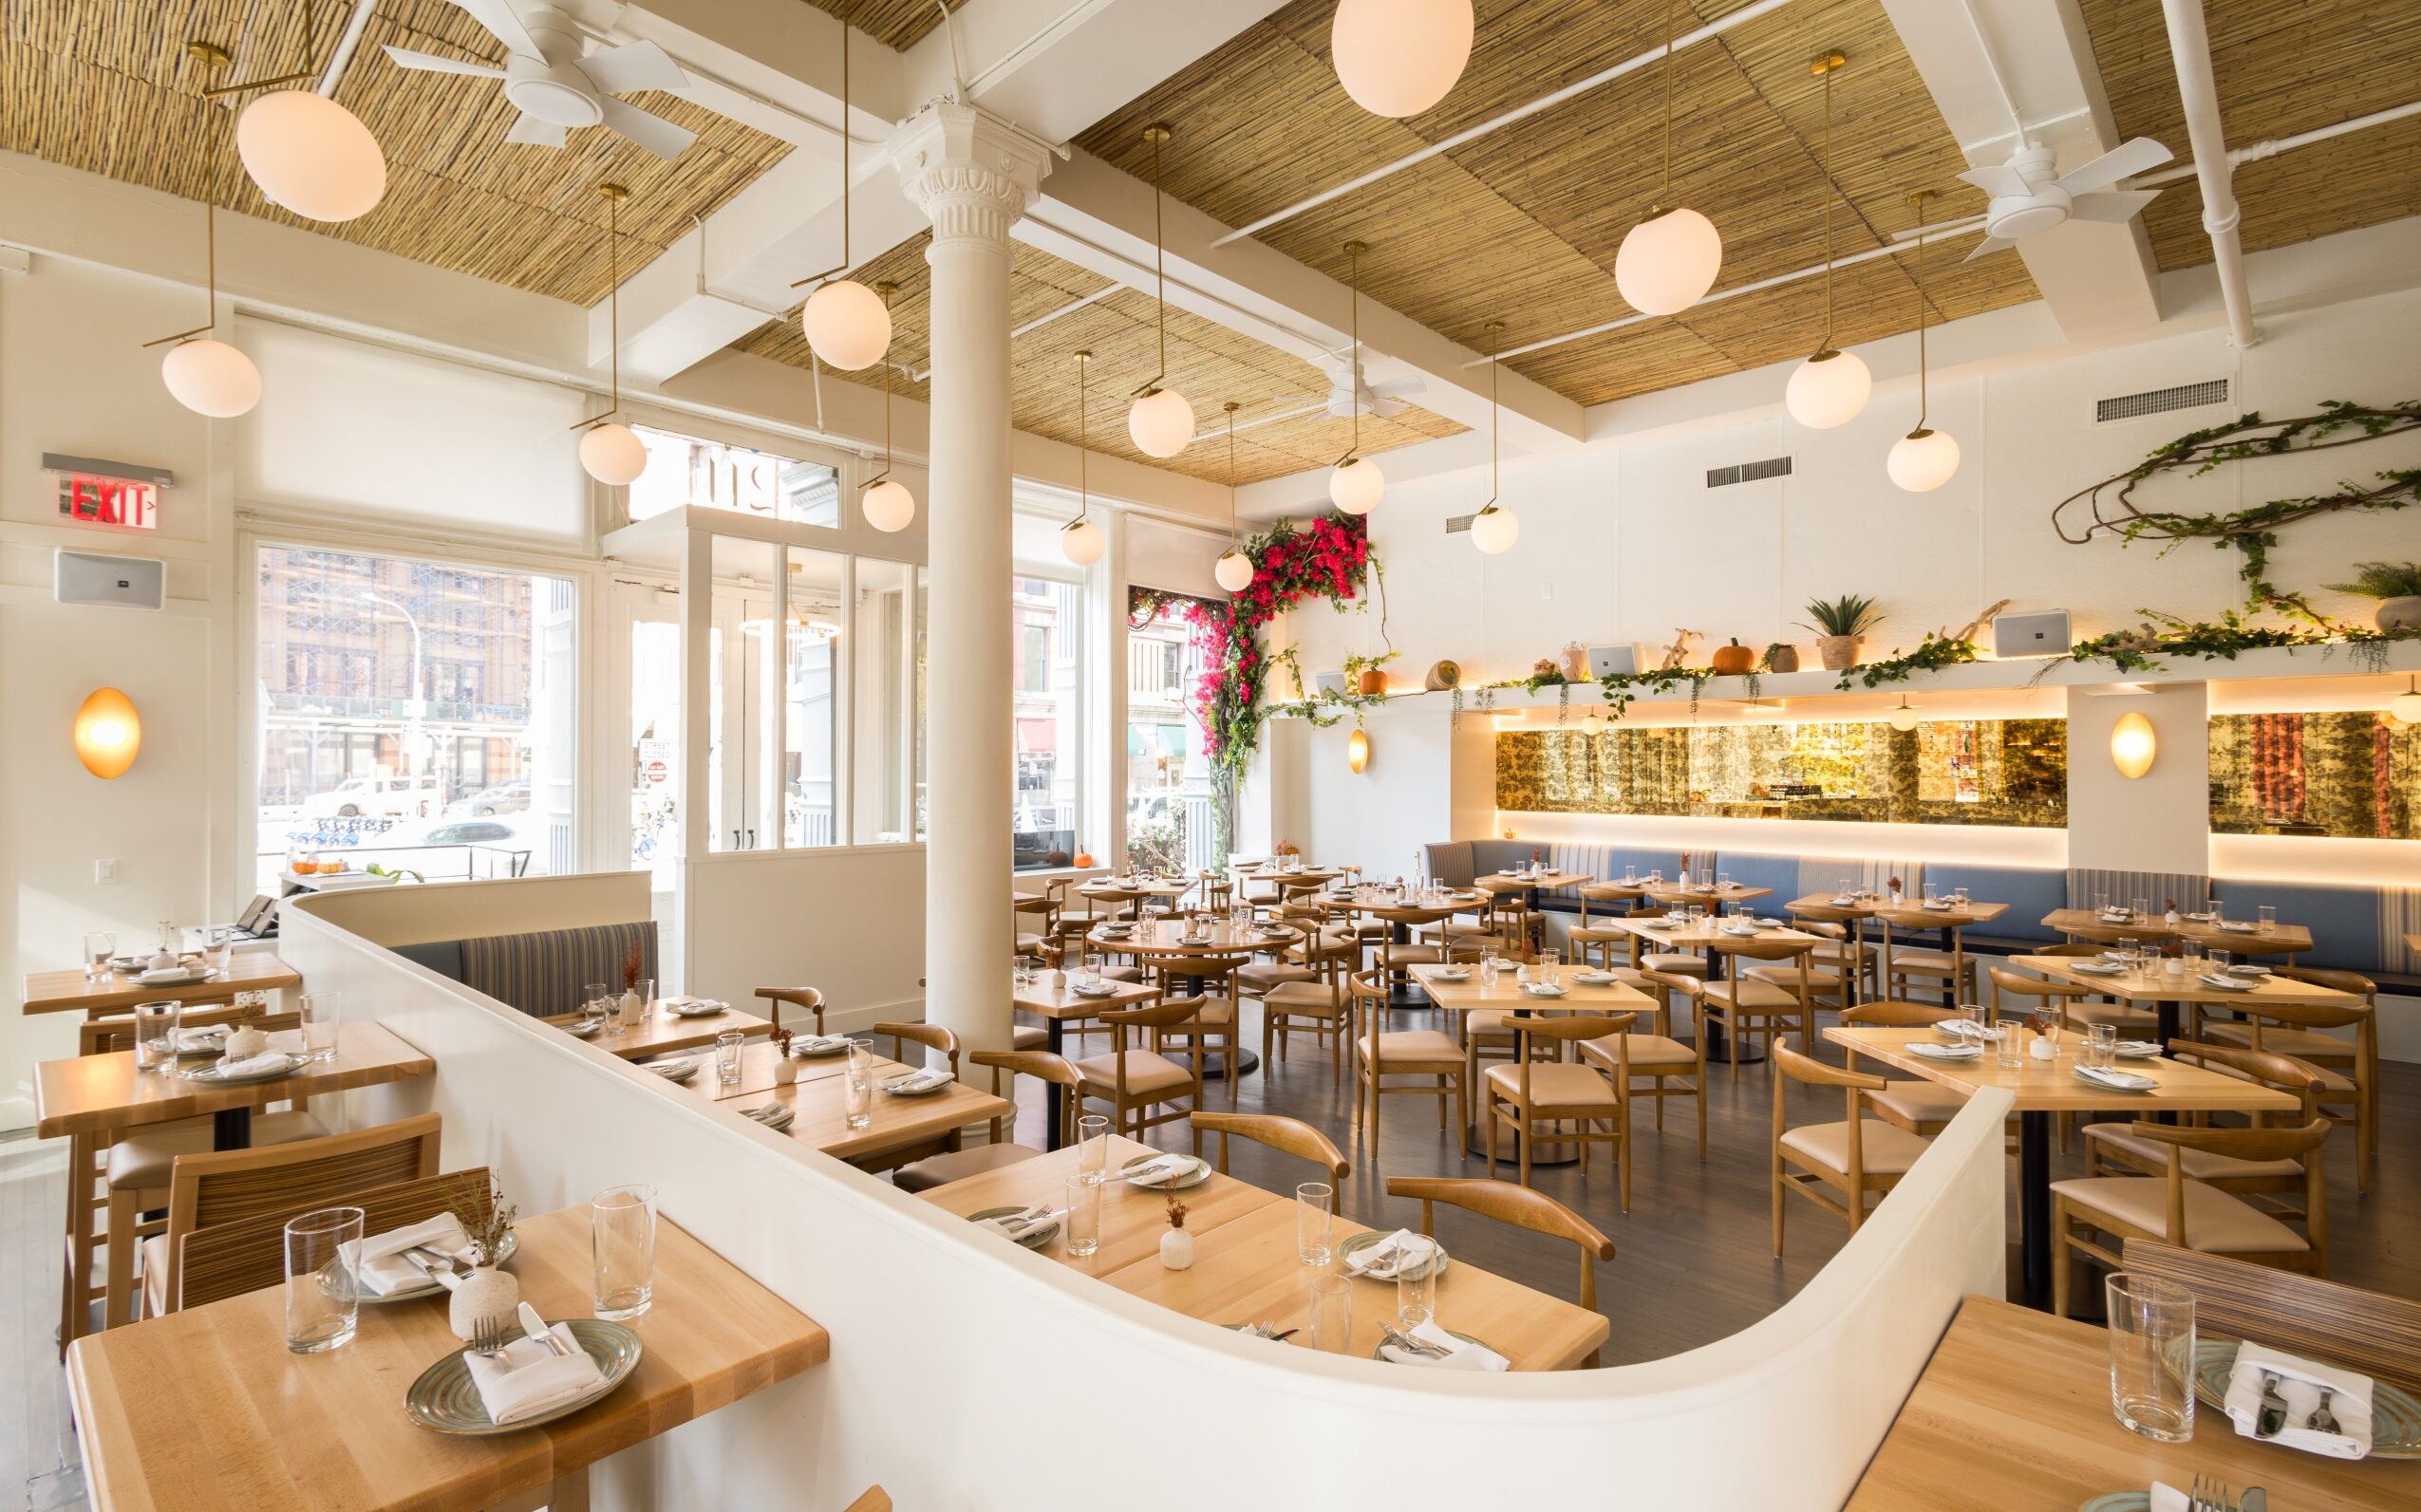 Paros Is the Chic, Elevated Aegean Dining Experience in Manhattan’s Tribeca Neighborhood